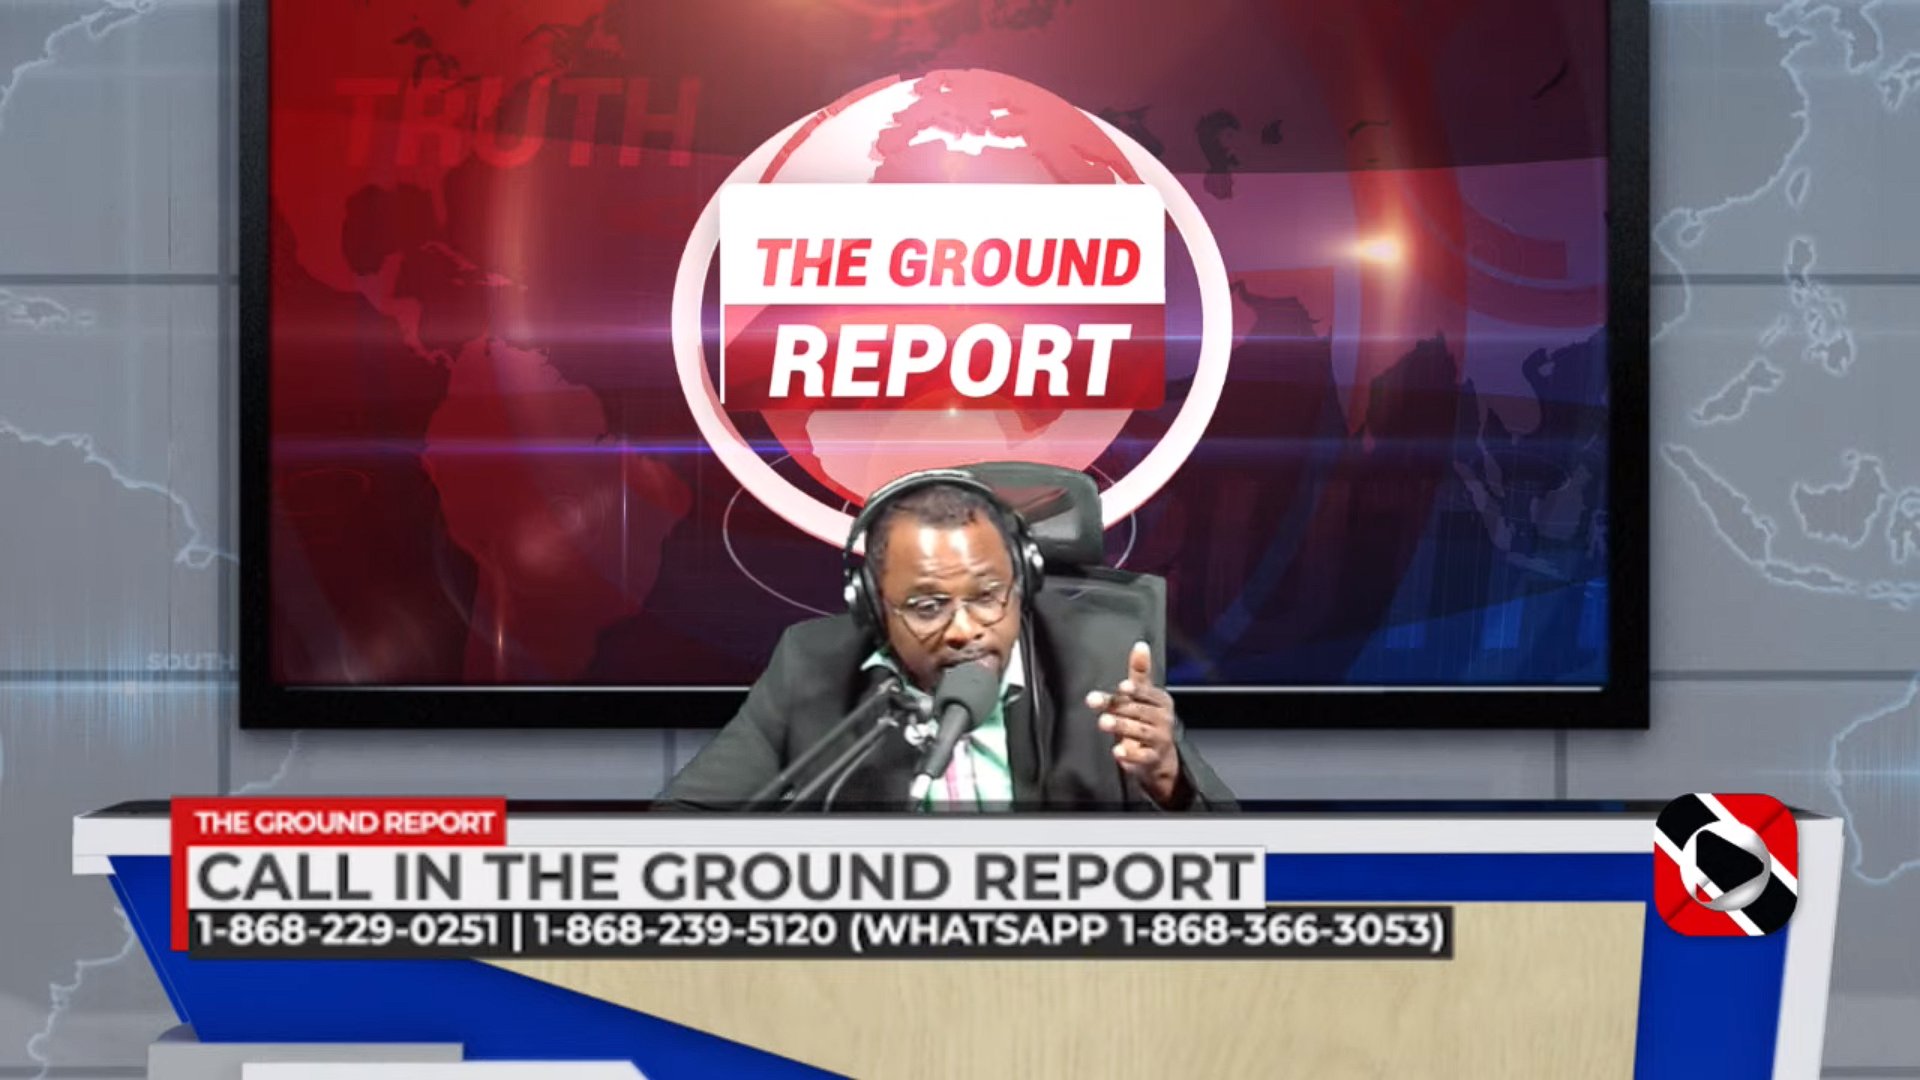 UNC Financed Ground Report is a Threat to Stability in Trinidad and Tobago